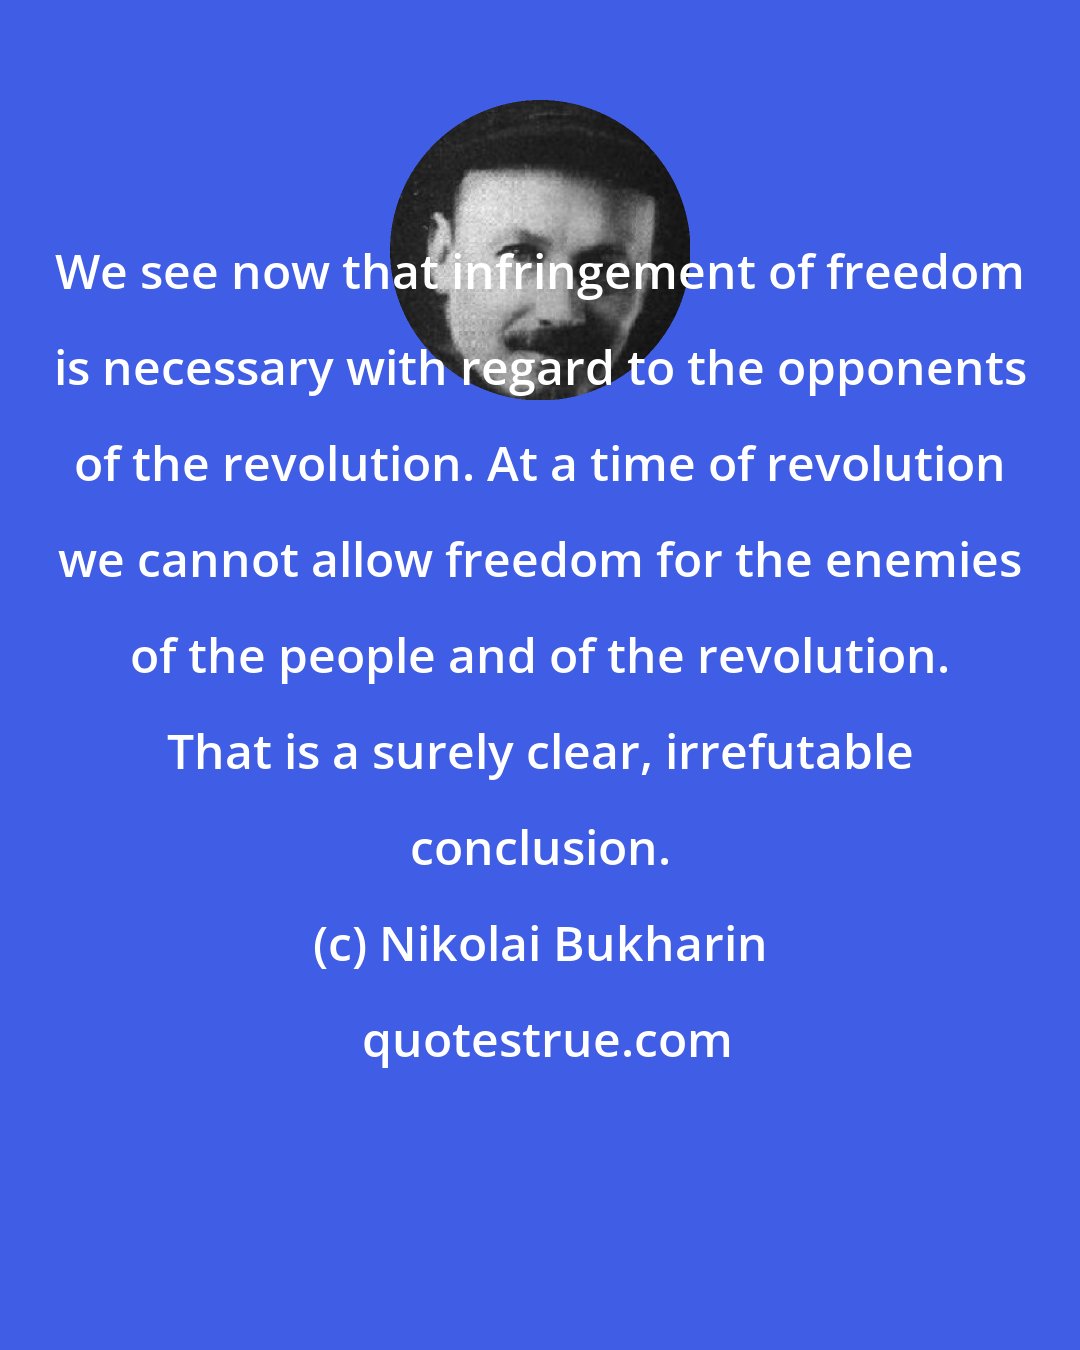 Nikolai Bukharin: We see now that infringement of freedom is necessary with regard to the opponents of the revolution. At a time of revolution we cannot allow freedom for the enemies of the people and of the revolution. That is a surely clear, irrefutable conclusion.